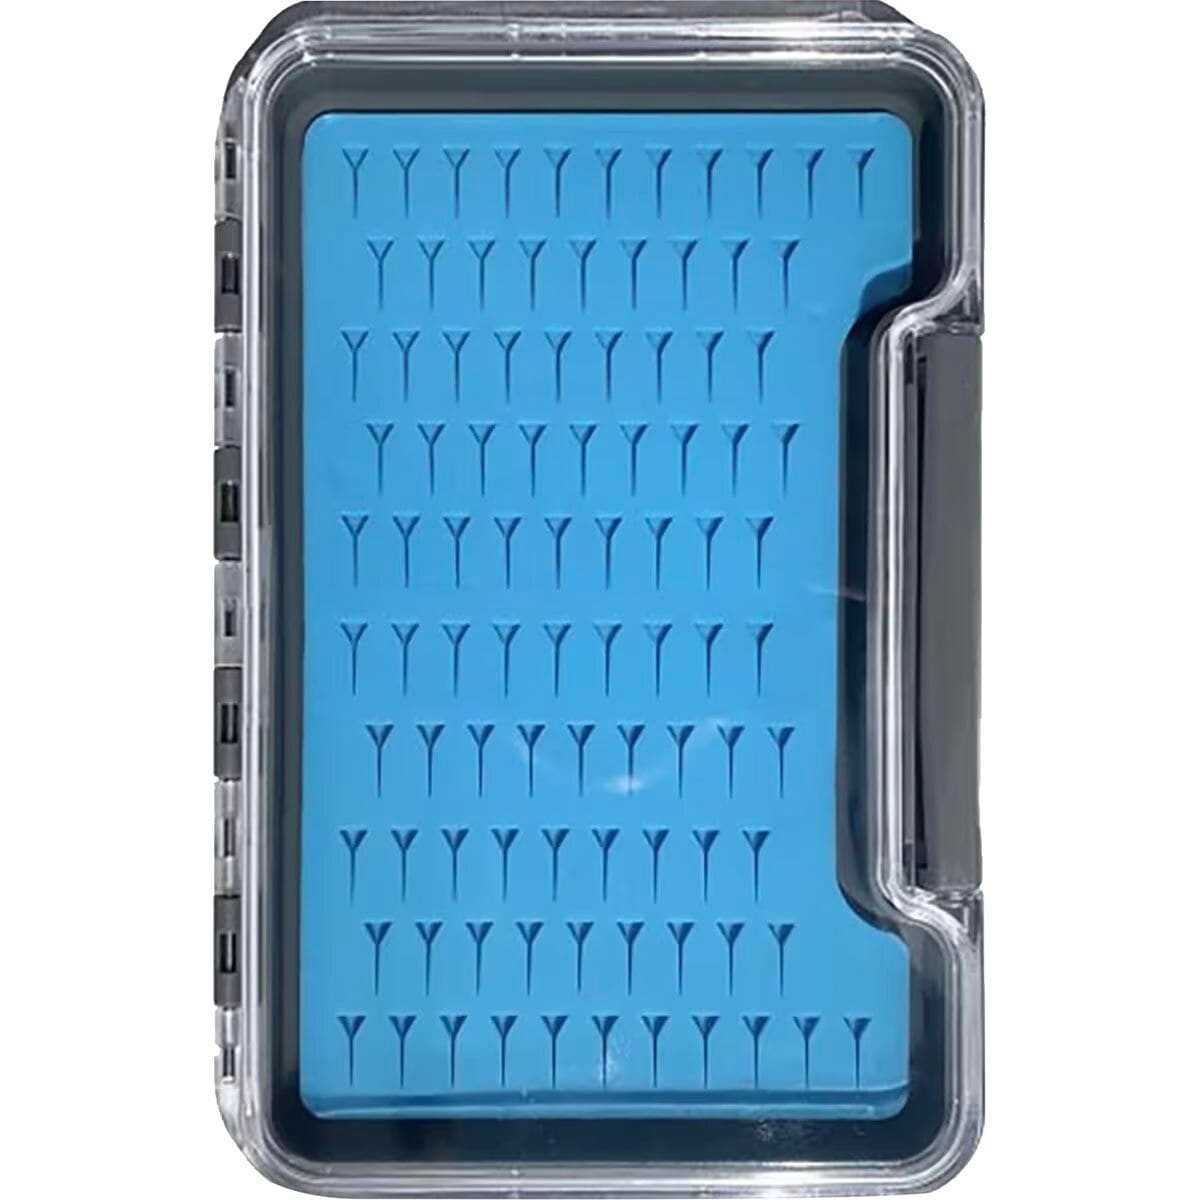 Angler's Accessories Silicone Slit Foam Fly Box